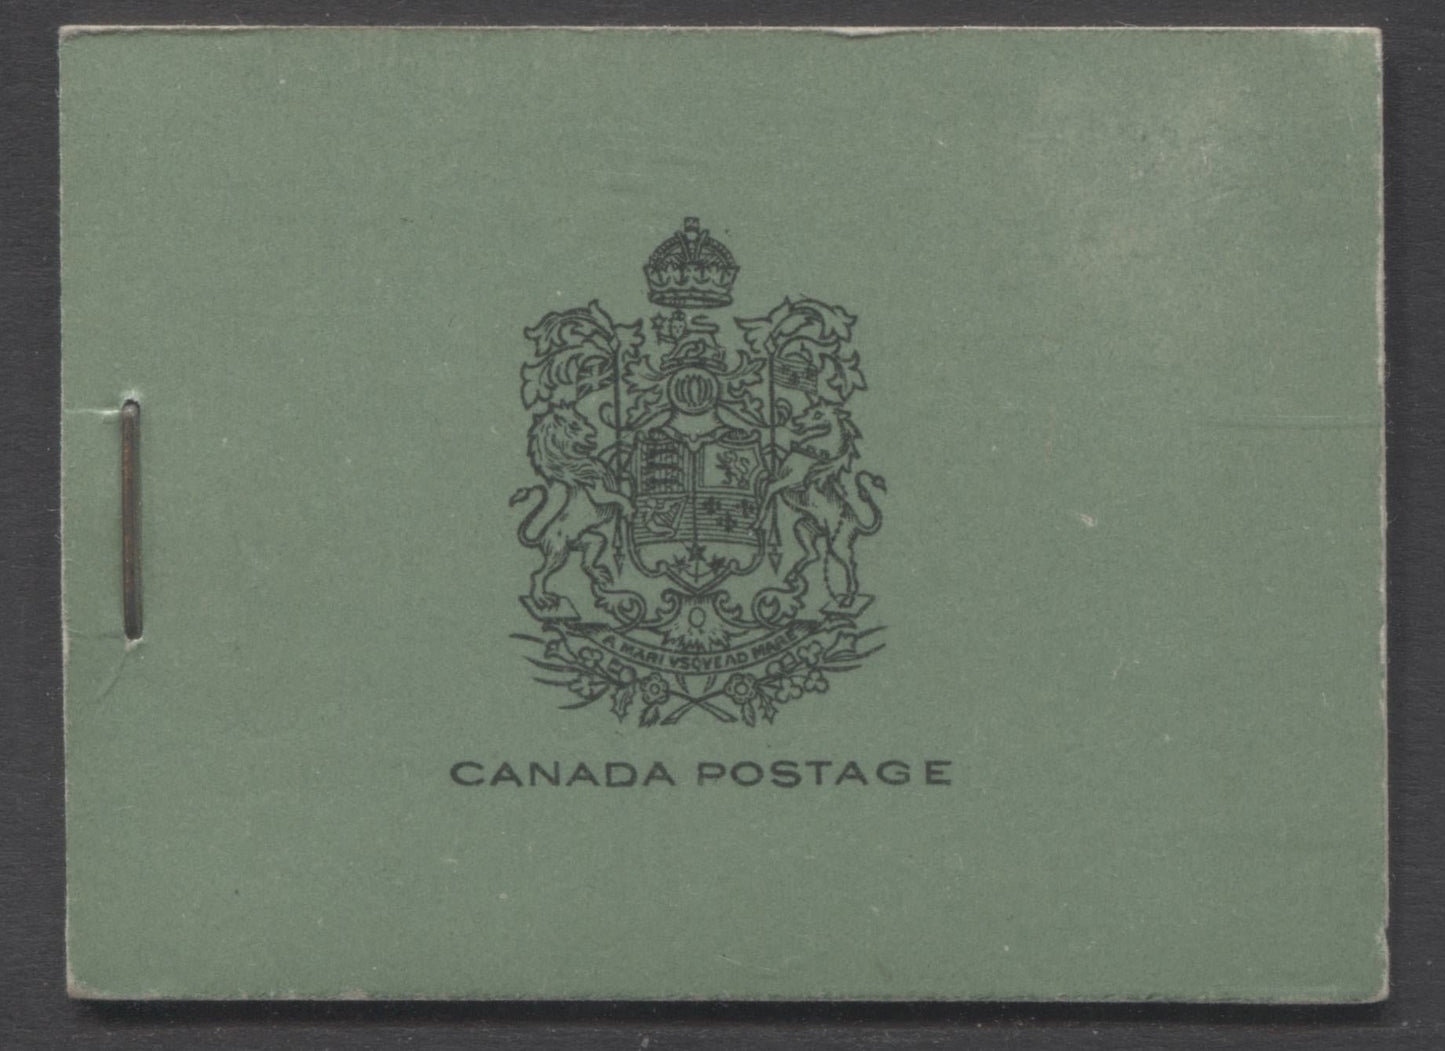 Lot 9 Canada #BK15aE 1930-1932 KGV Arch Or Leaf Issue, A Complete 25c English Booklet, 2 Panes Of 6 2c Green, Typographed Cover, No Tape, Flat Plate Printing, 1,016,000 Issued